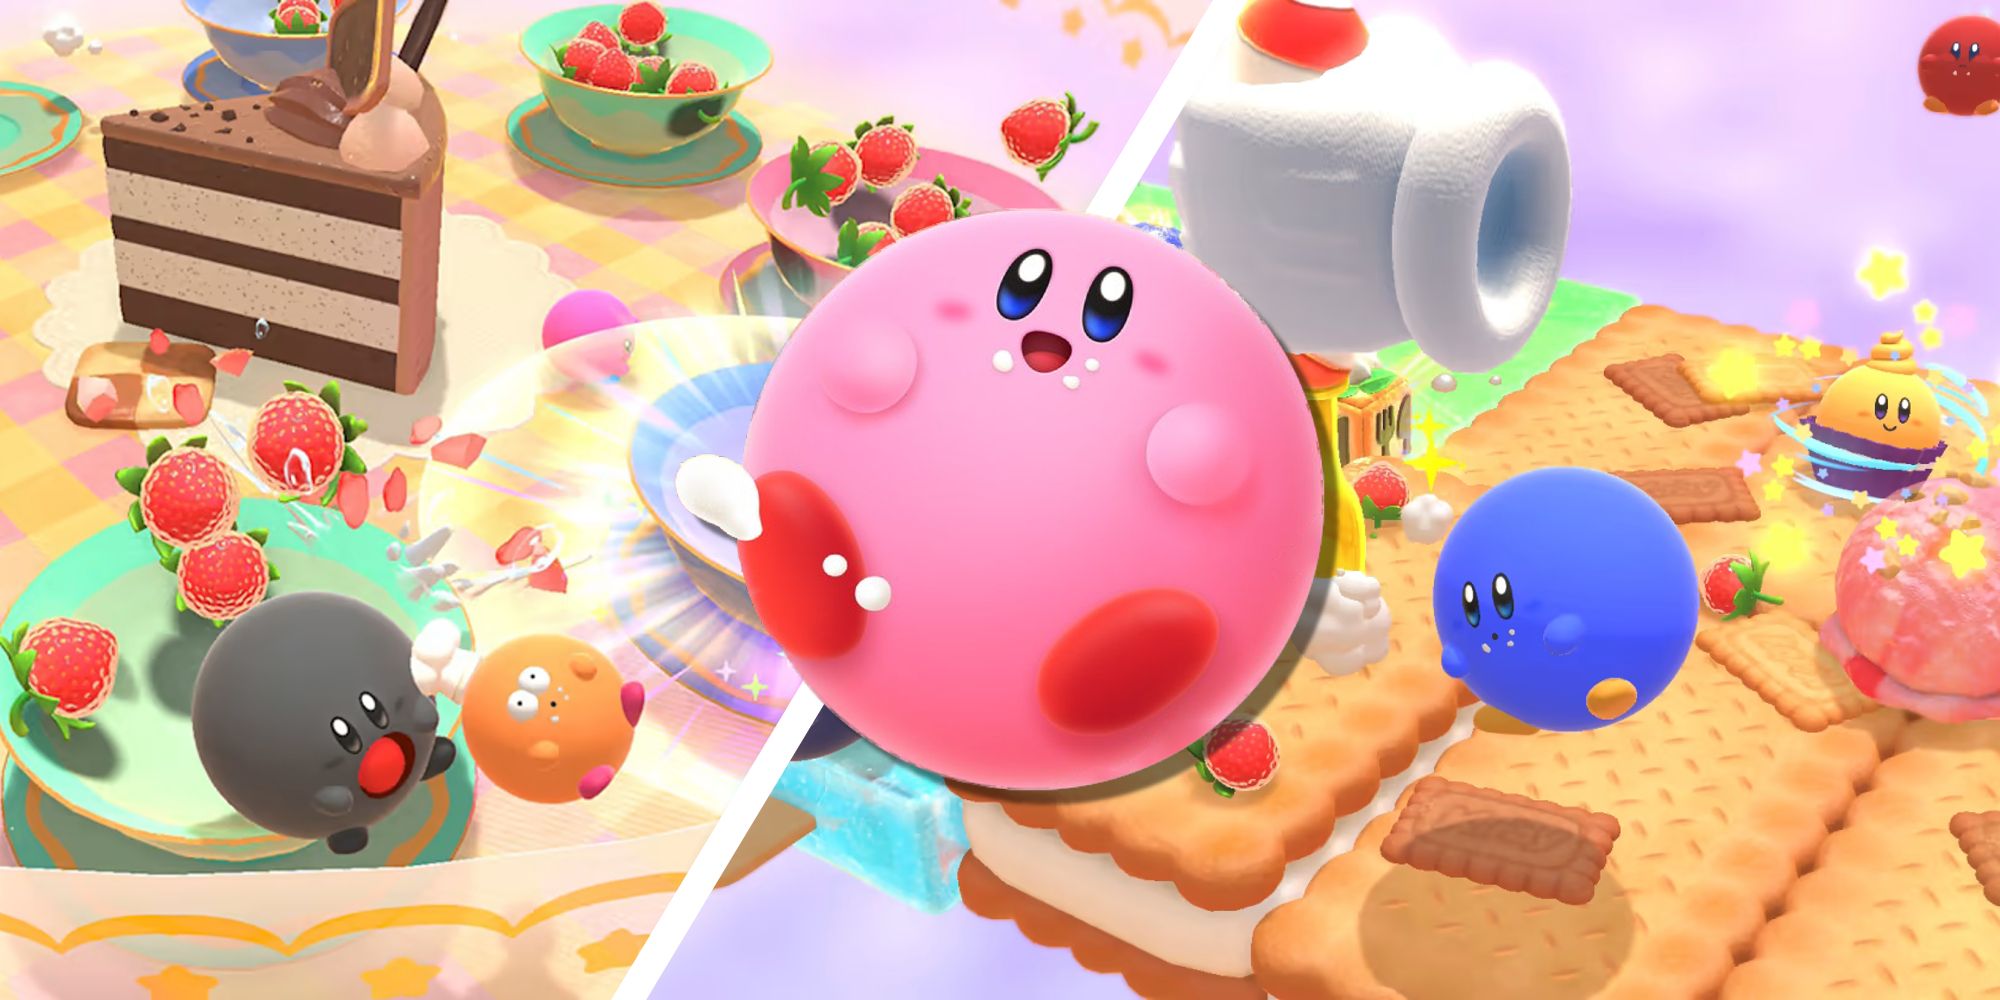 What are the differences between Kirby's Dream Buffet and Fall